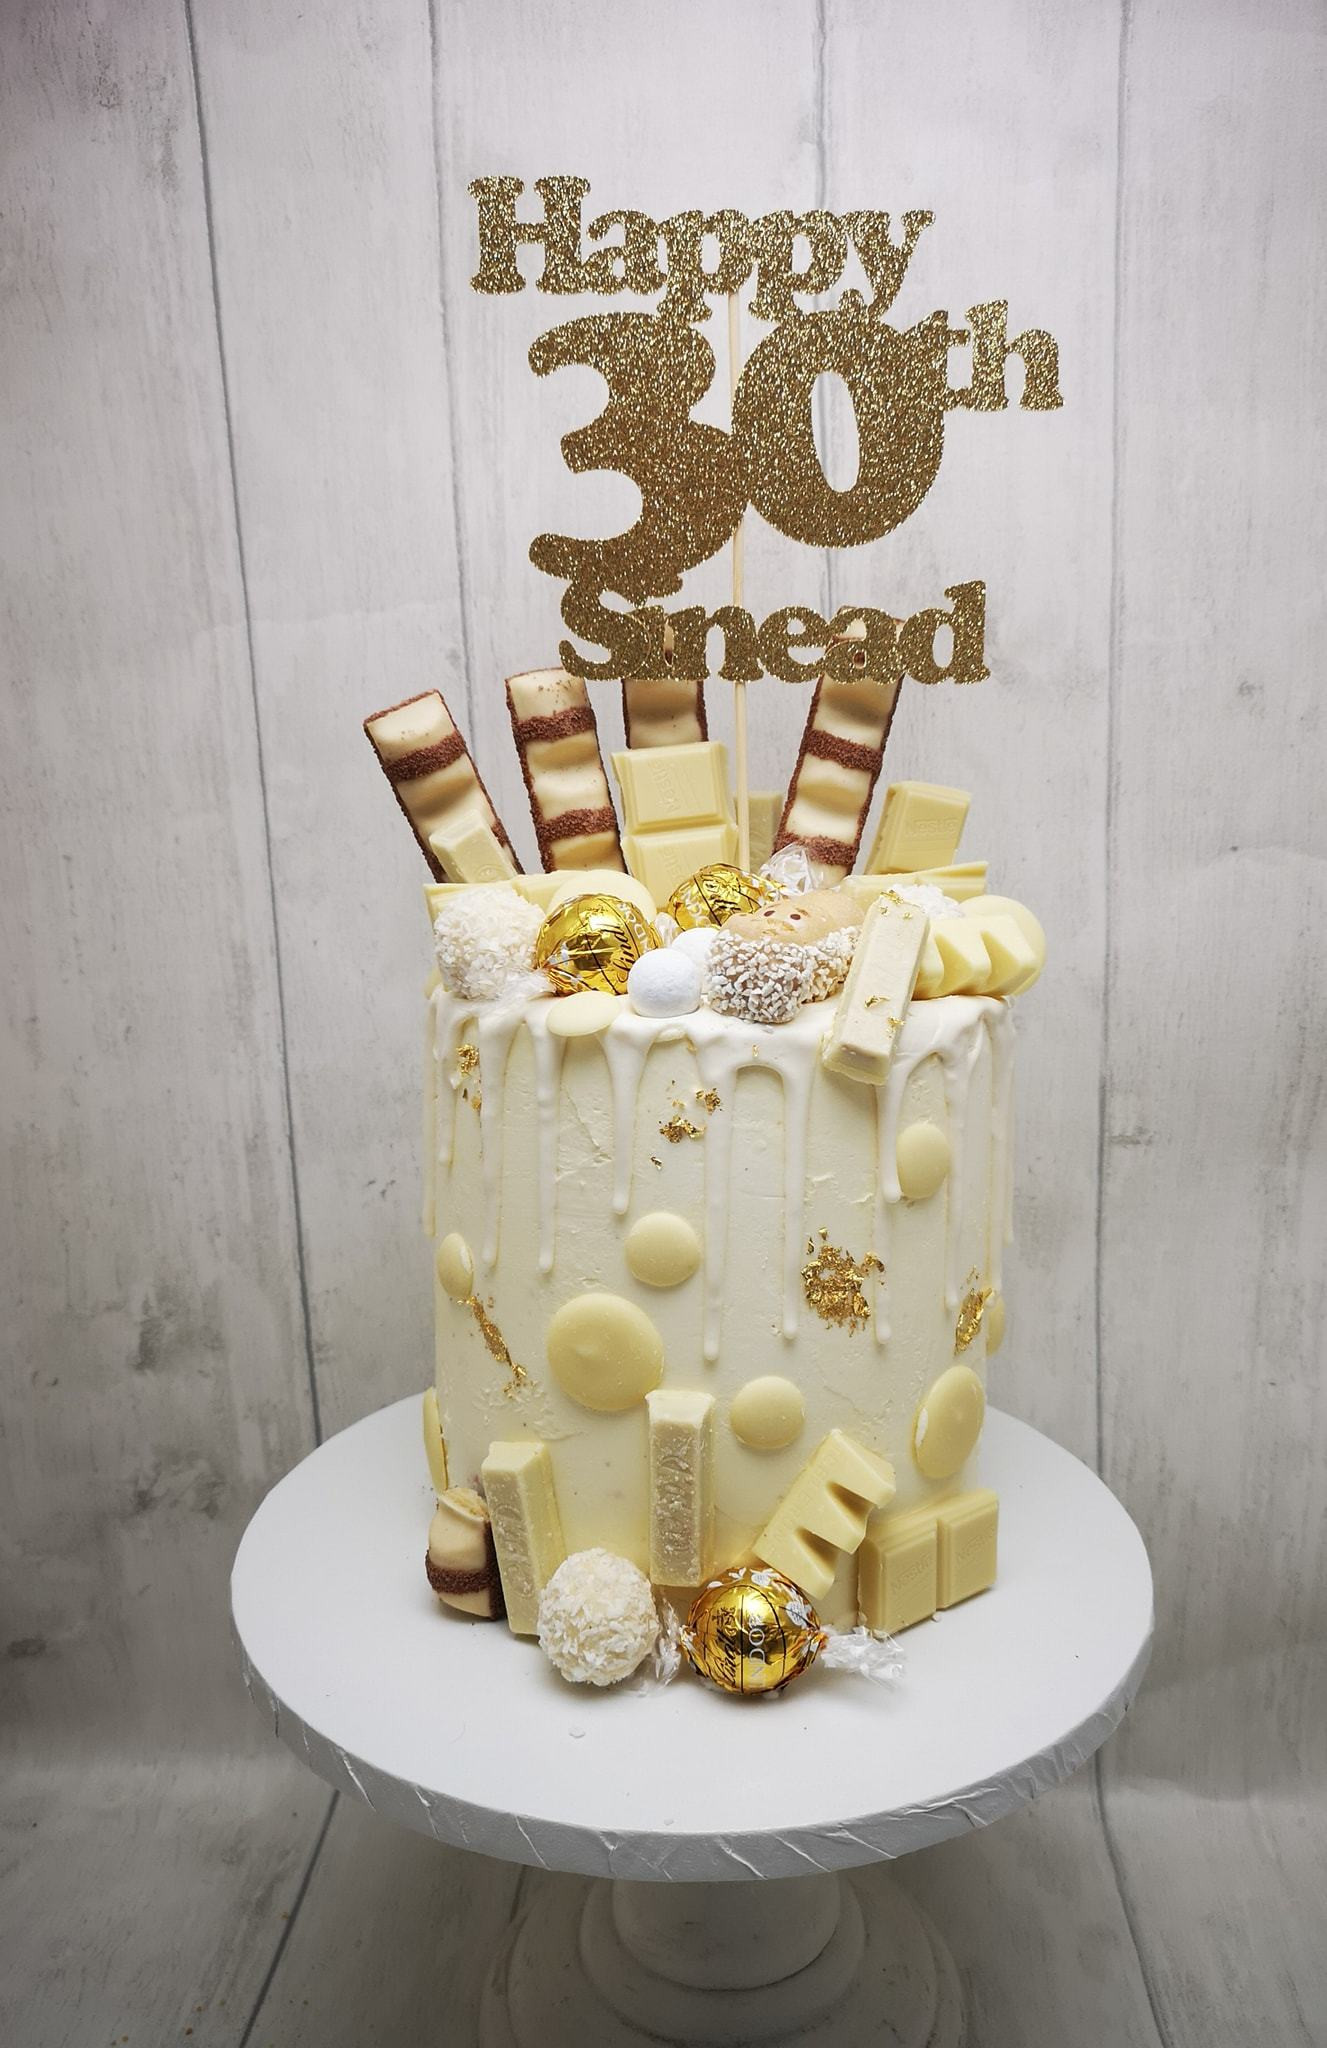 30th Birthday Cake Ideas
 30th birthday cakes 40th birthday Cakes Must See Ideas